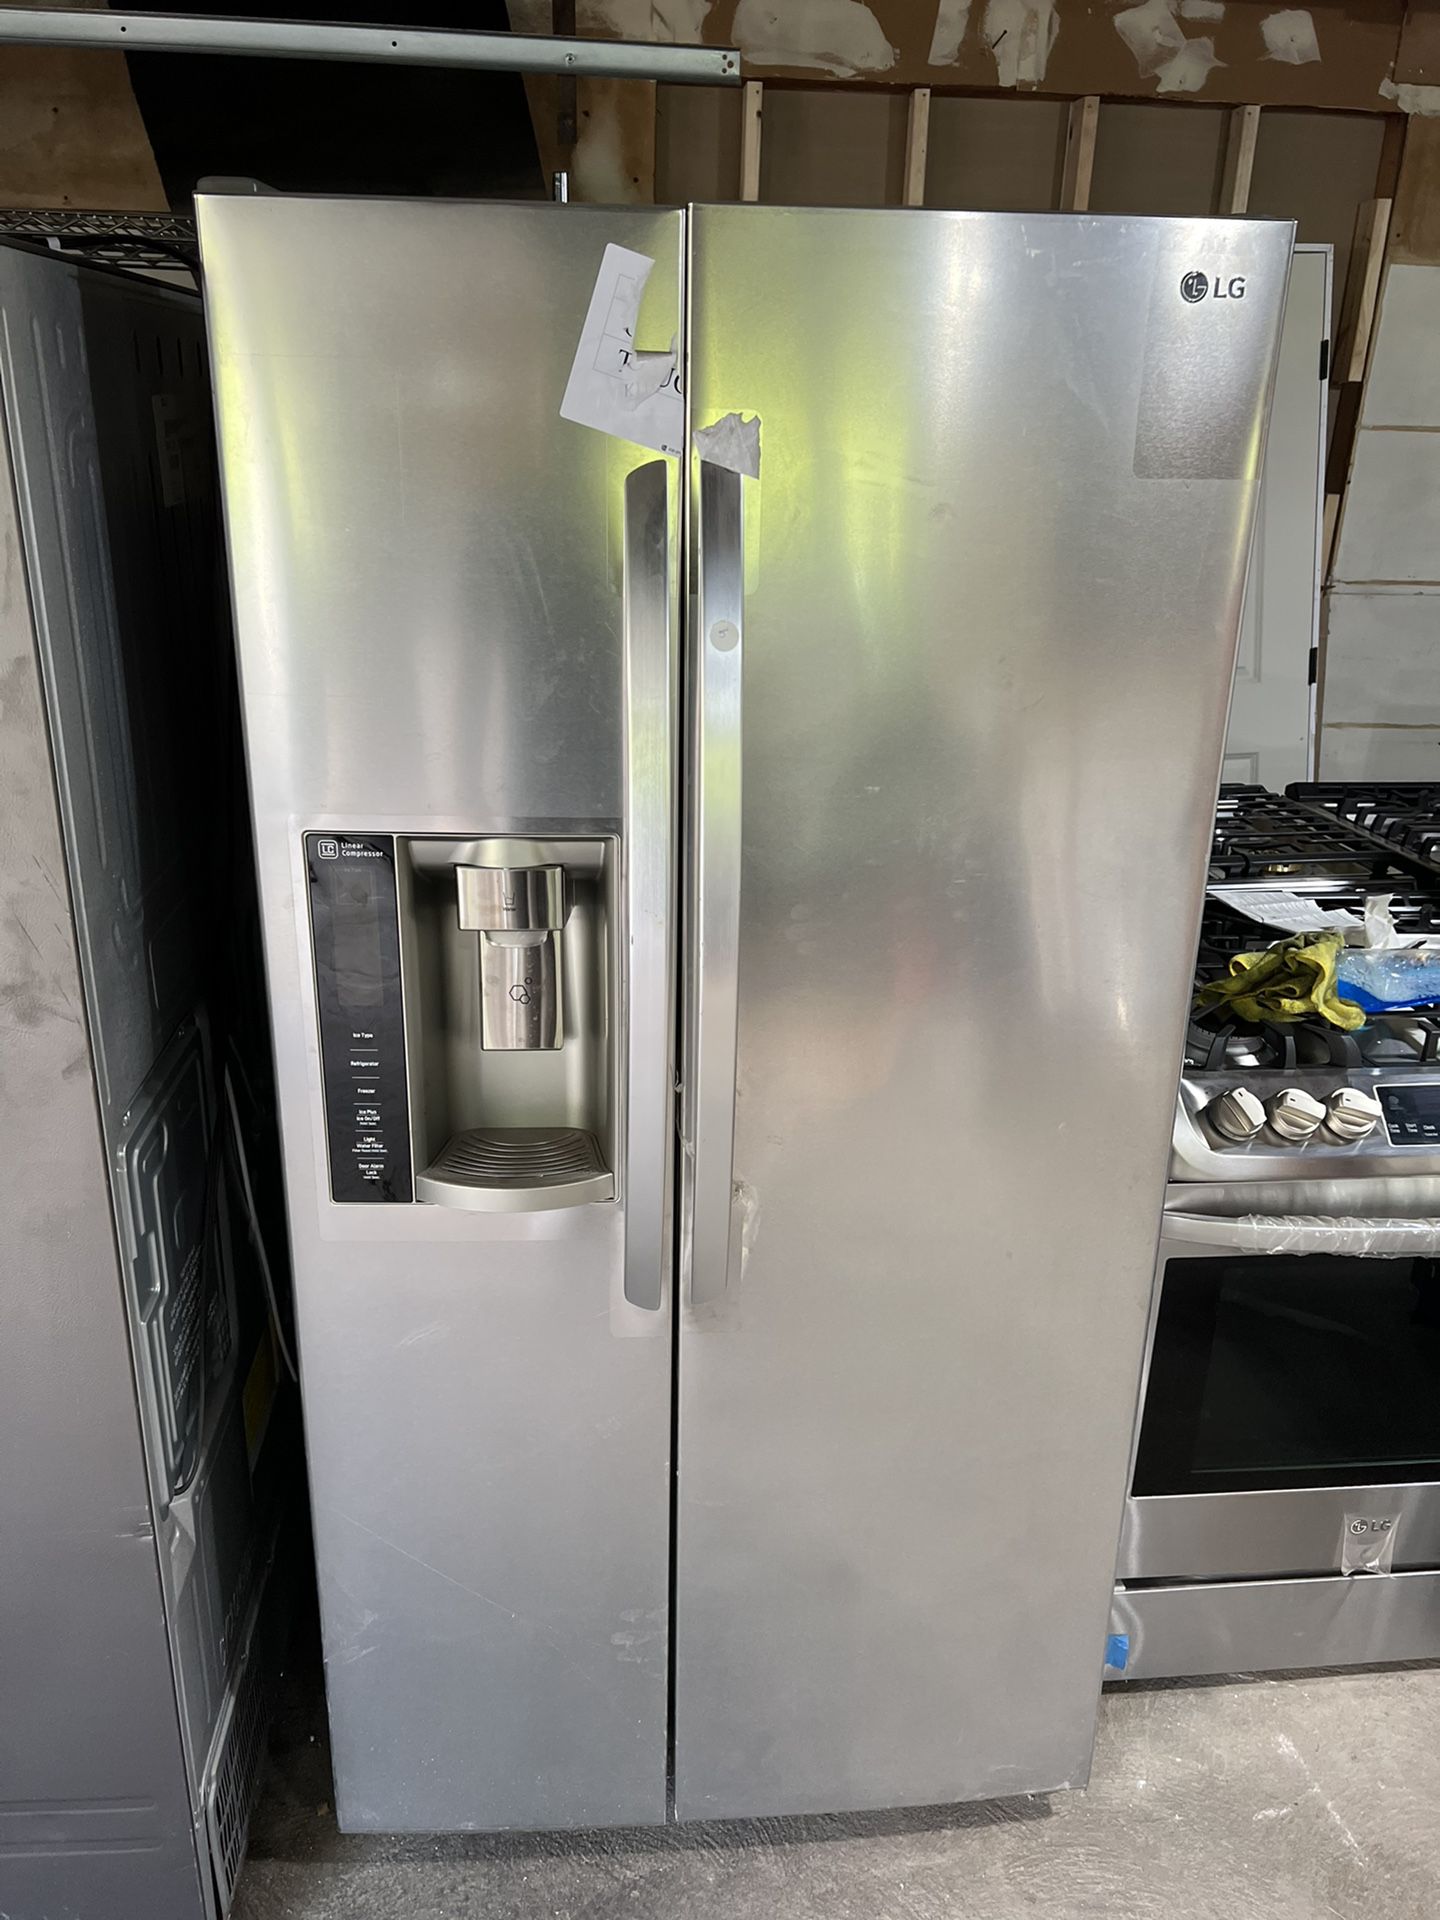 LG Refrigerator Side-By-Side Retail Price 1500$